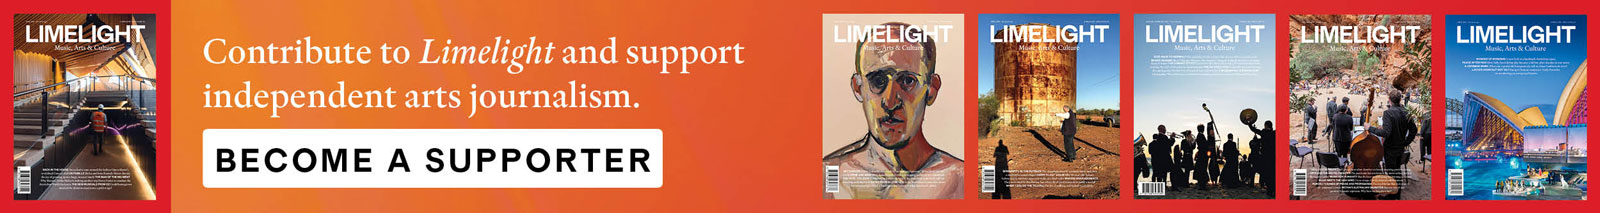 Contribute to Limelight and support independent arts journalism.